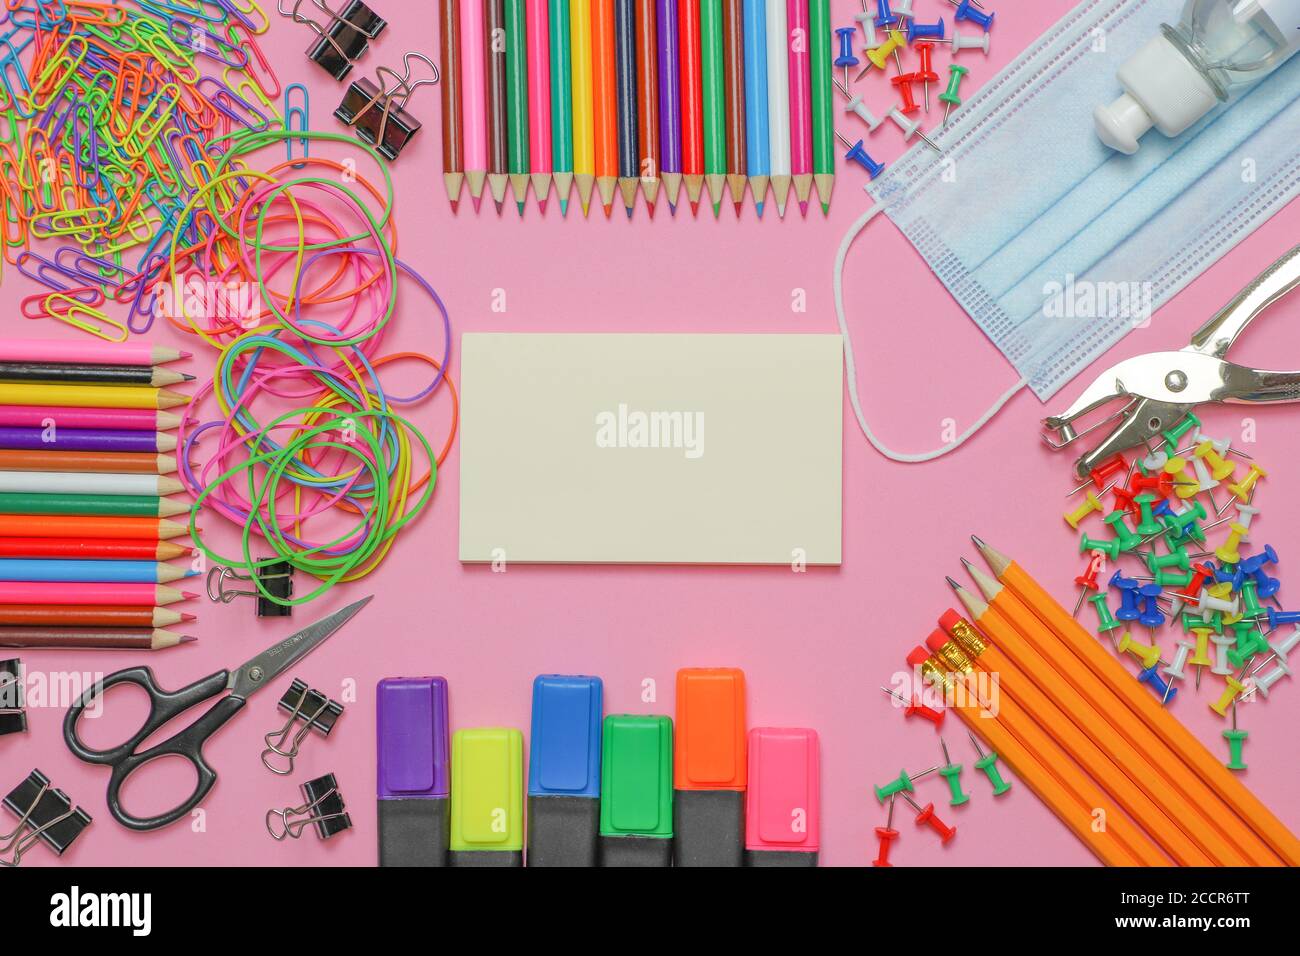 School stationery supplies with medical mask and hand sanitizer on pink background. Back to school and new normal concept. COVID-19 prevention. Stock Photo